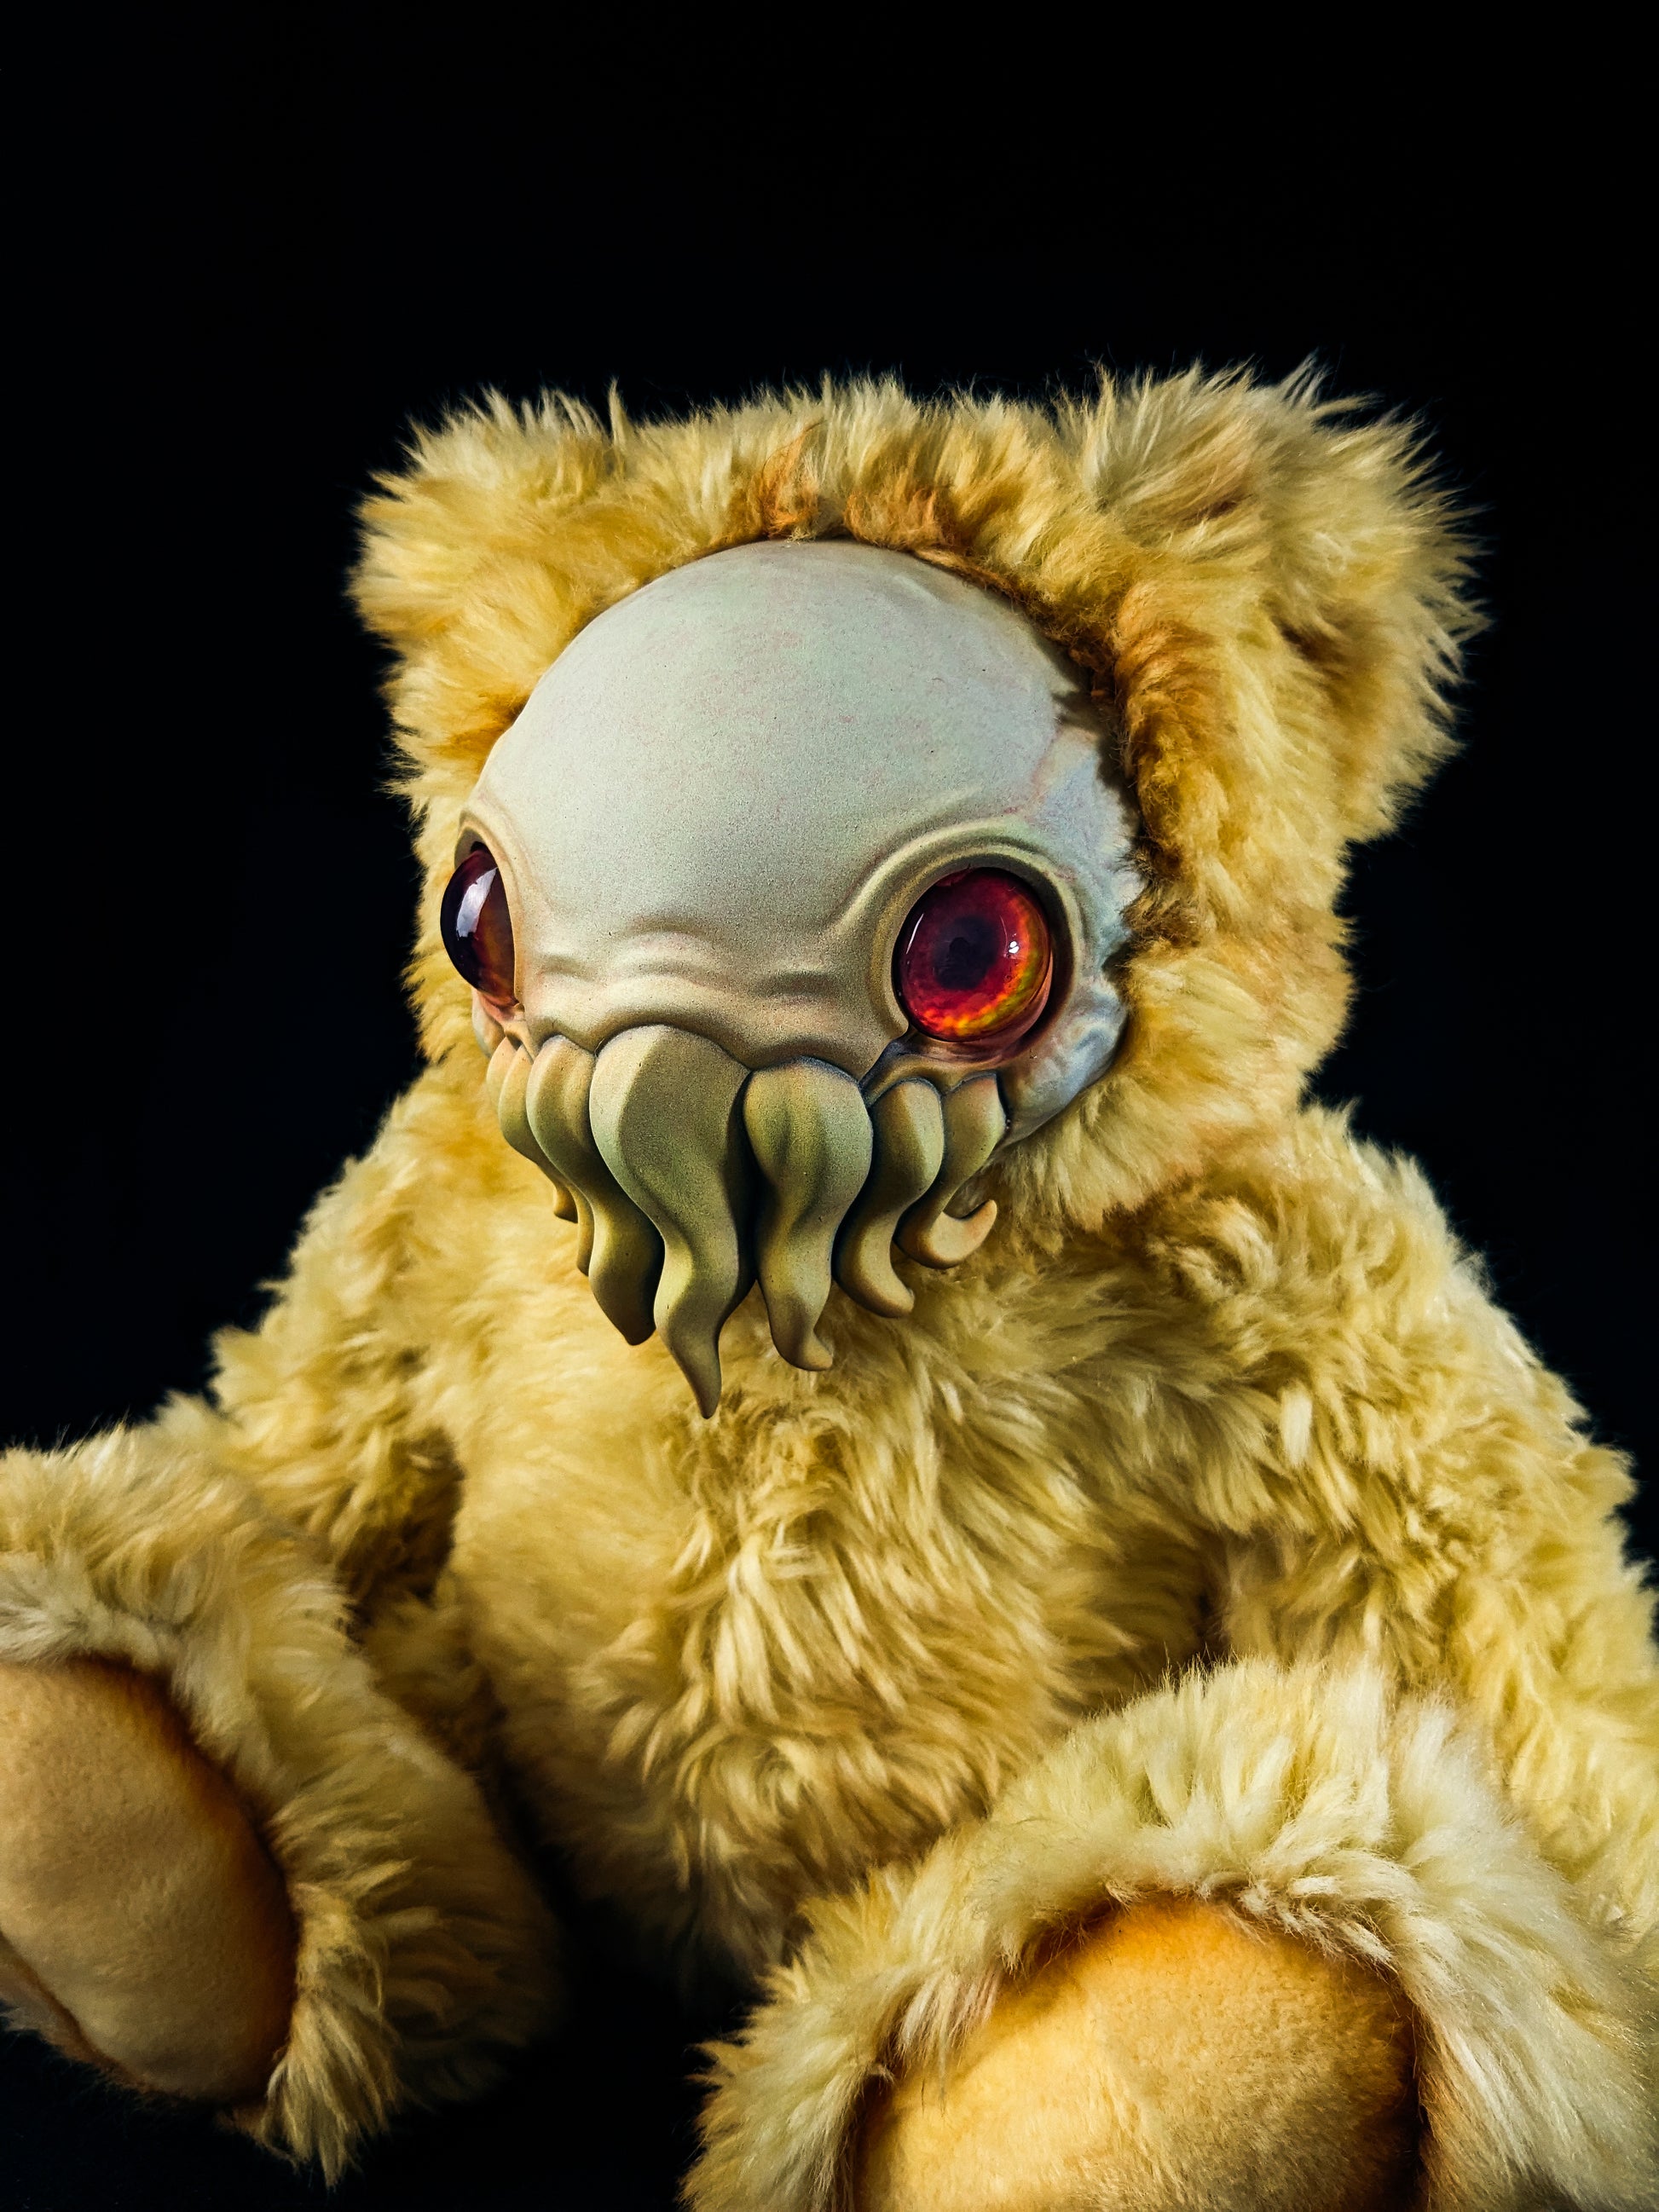 Lemon Leech: ELDINUTH - CRYPTCRITZ Handcrafted Lovecraftian Cthulhu Art Doll Plush Toy for Eldritch Entities